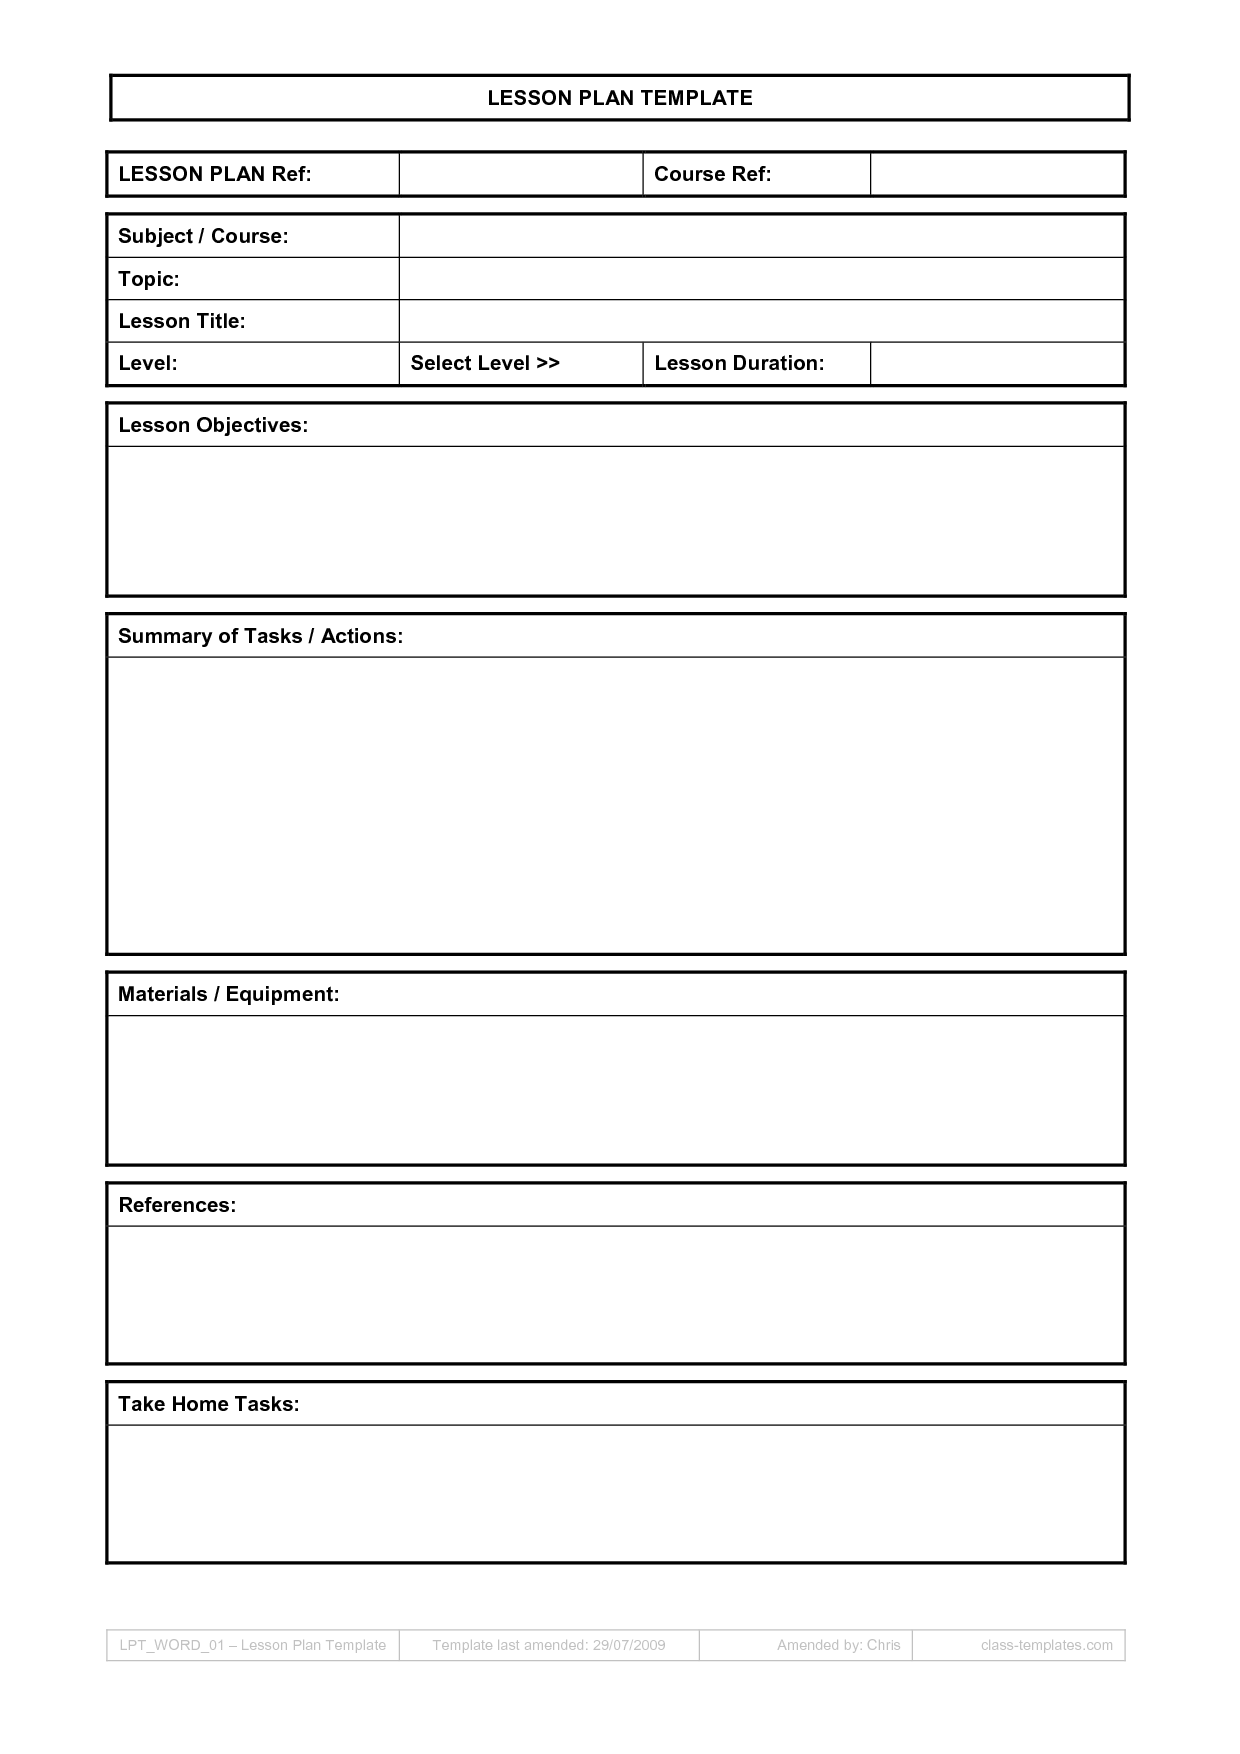 Lesson Plan Template for Binders Free by Angie Amos | TpT